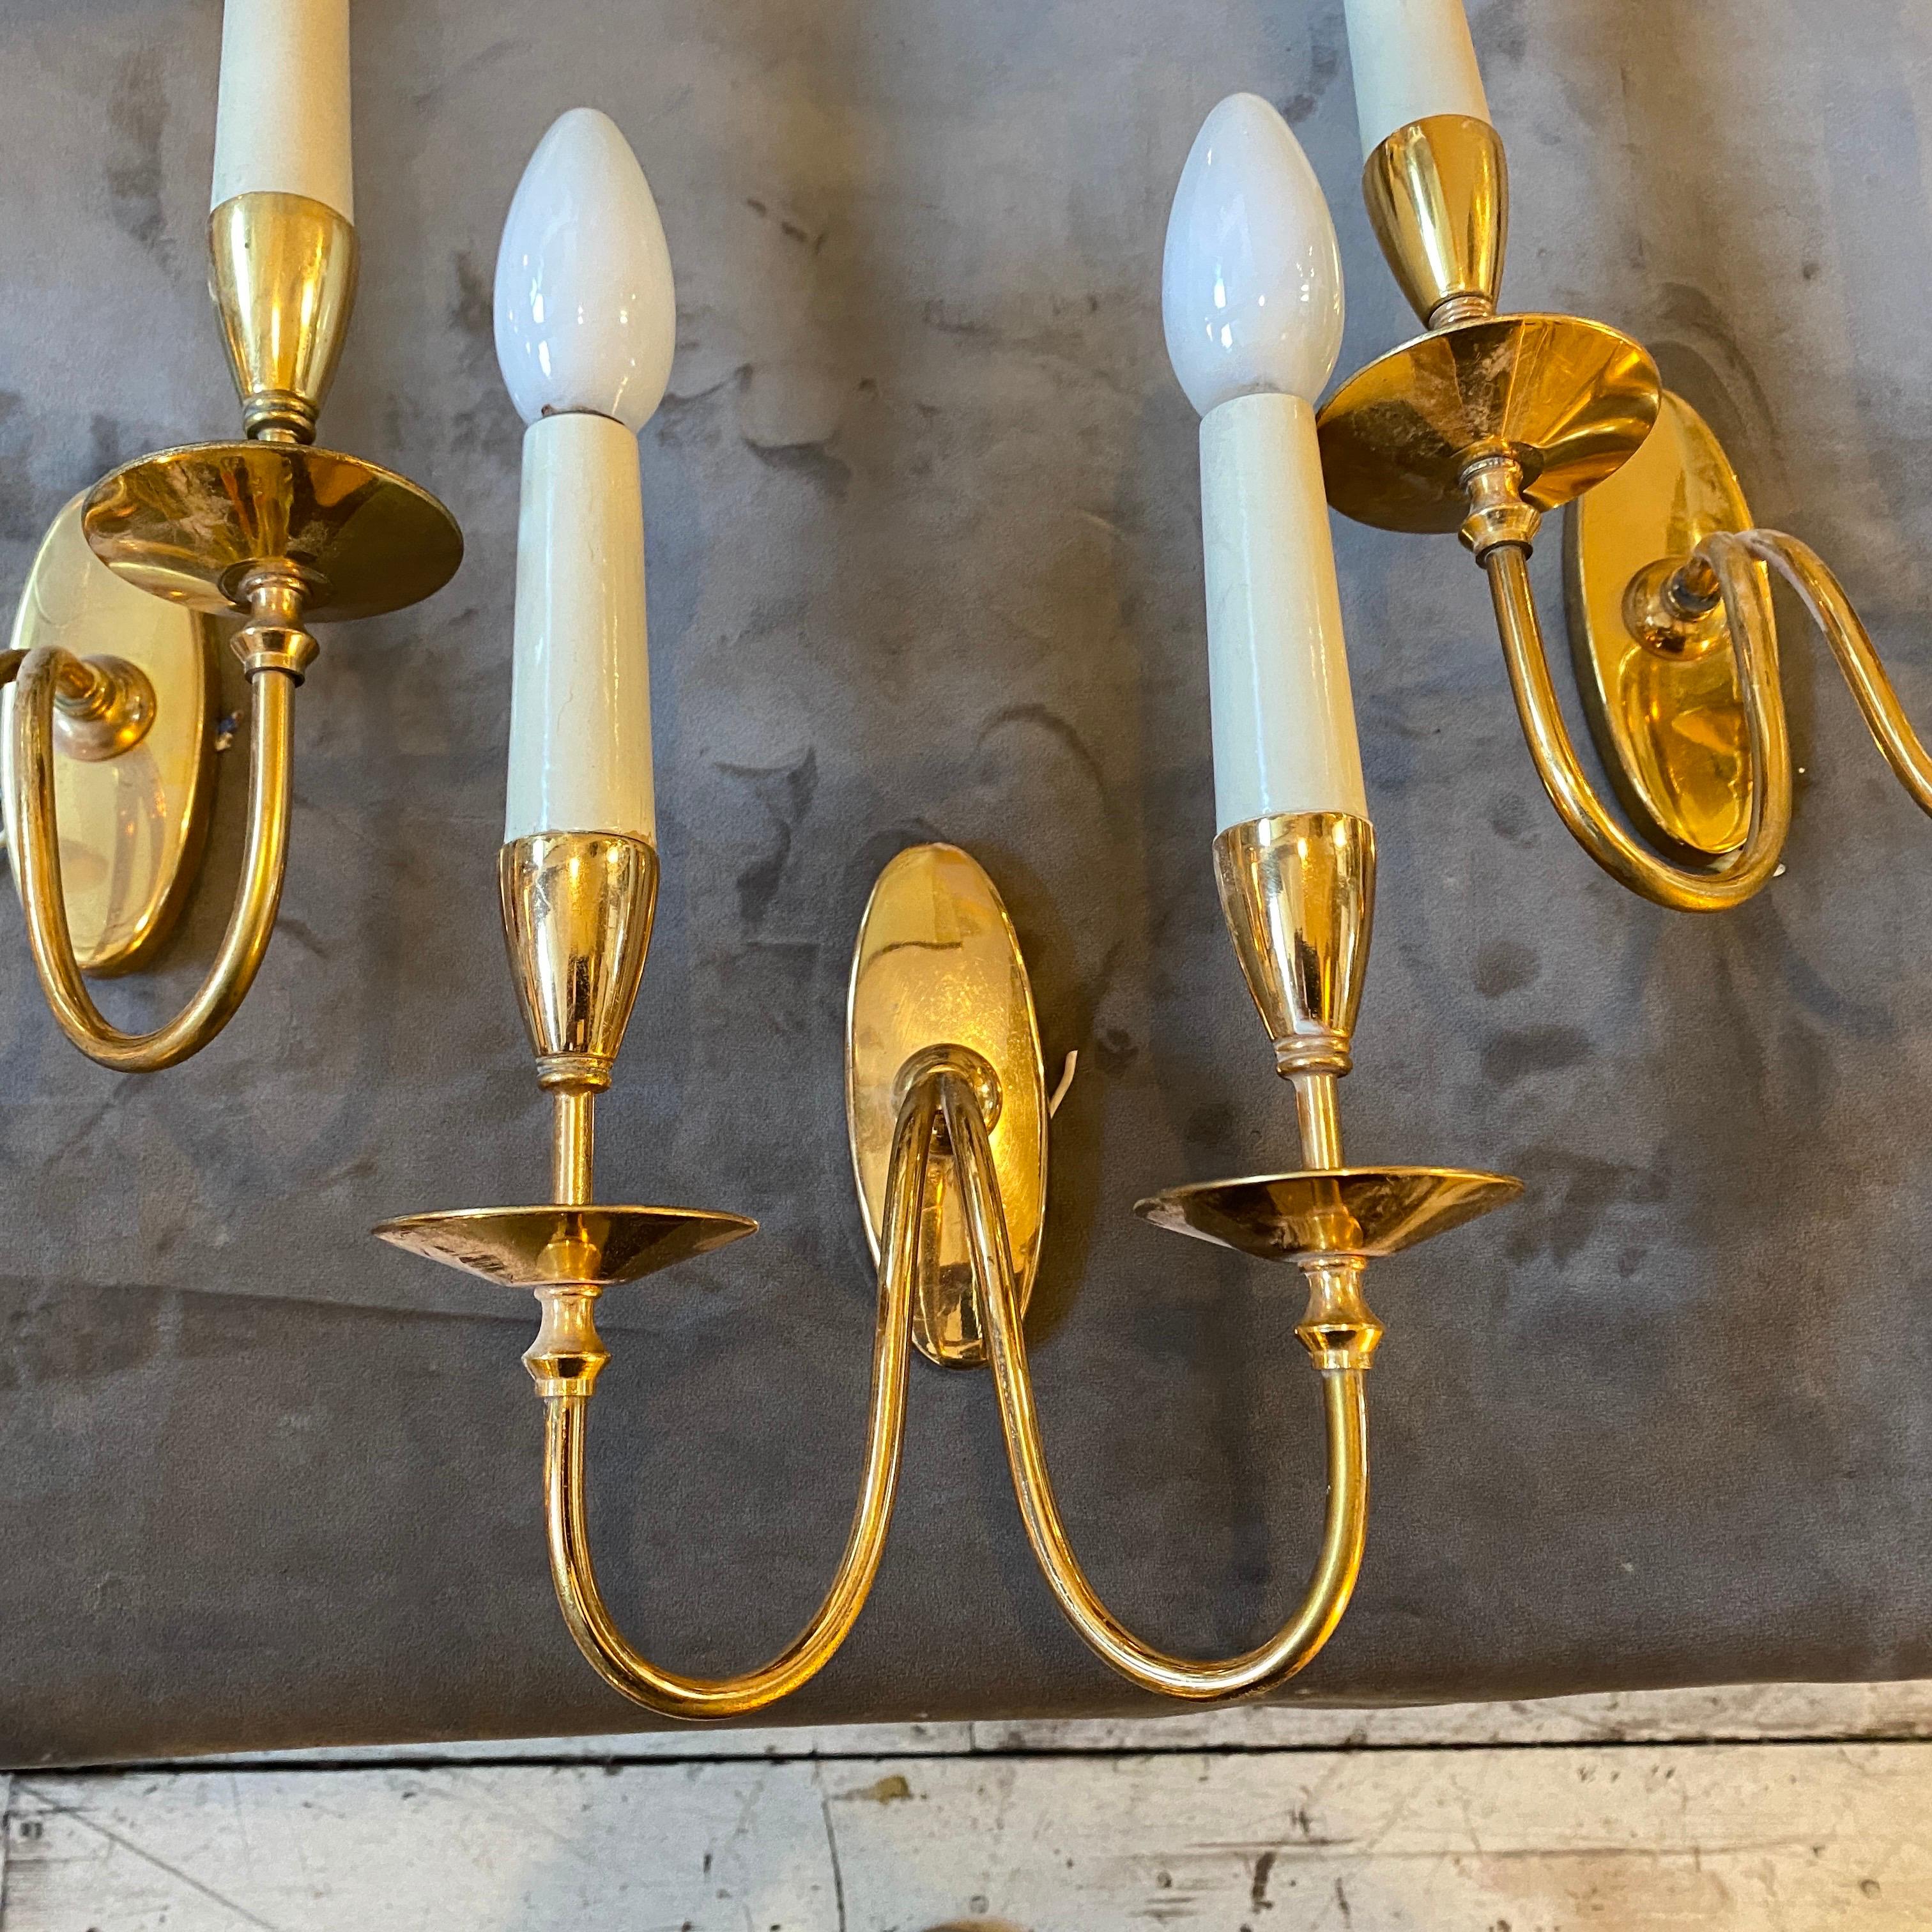 Set of four high quality solid brass wall sconces designed and manufactured in Italy in the Sixties by Bruno Chiarini. They are marked on the back part, they work 110-240 volts and need regular e14 bulbs.